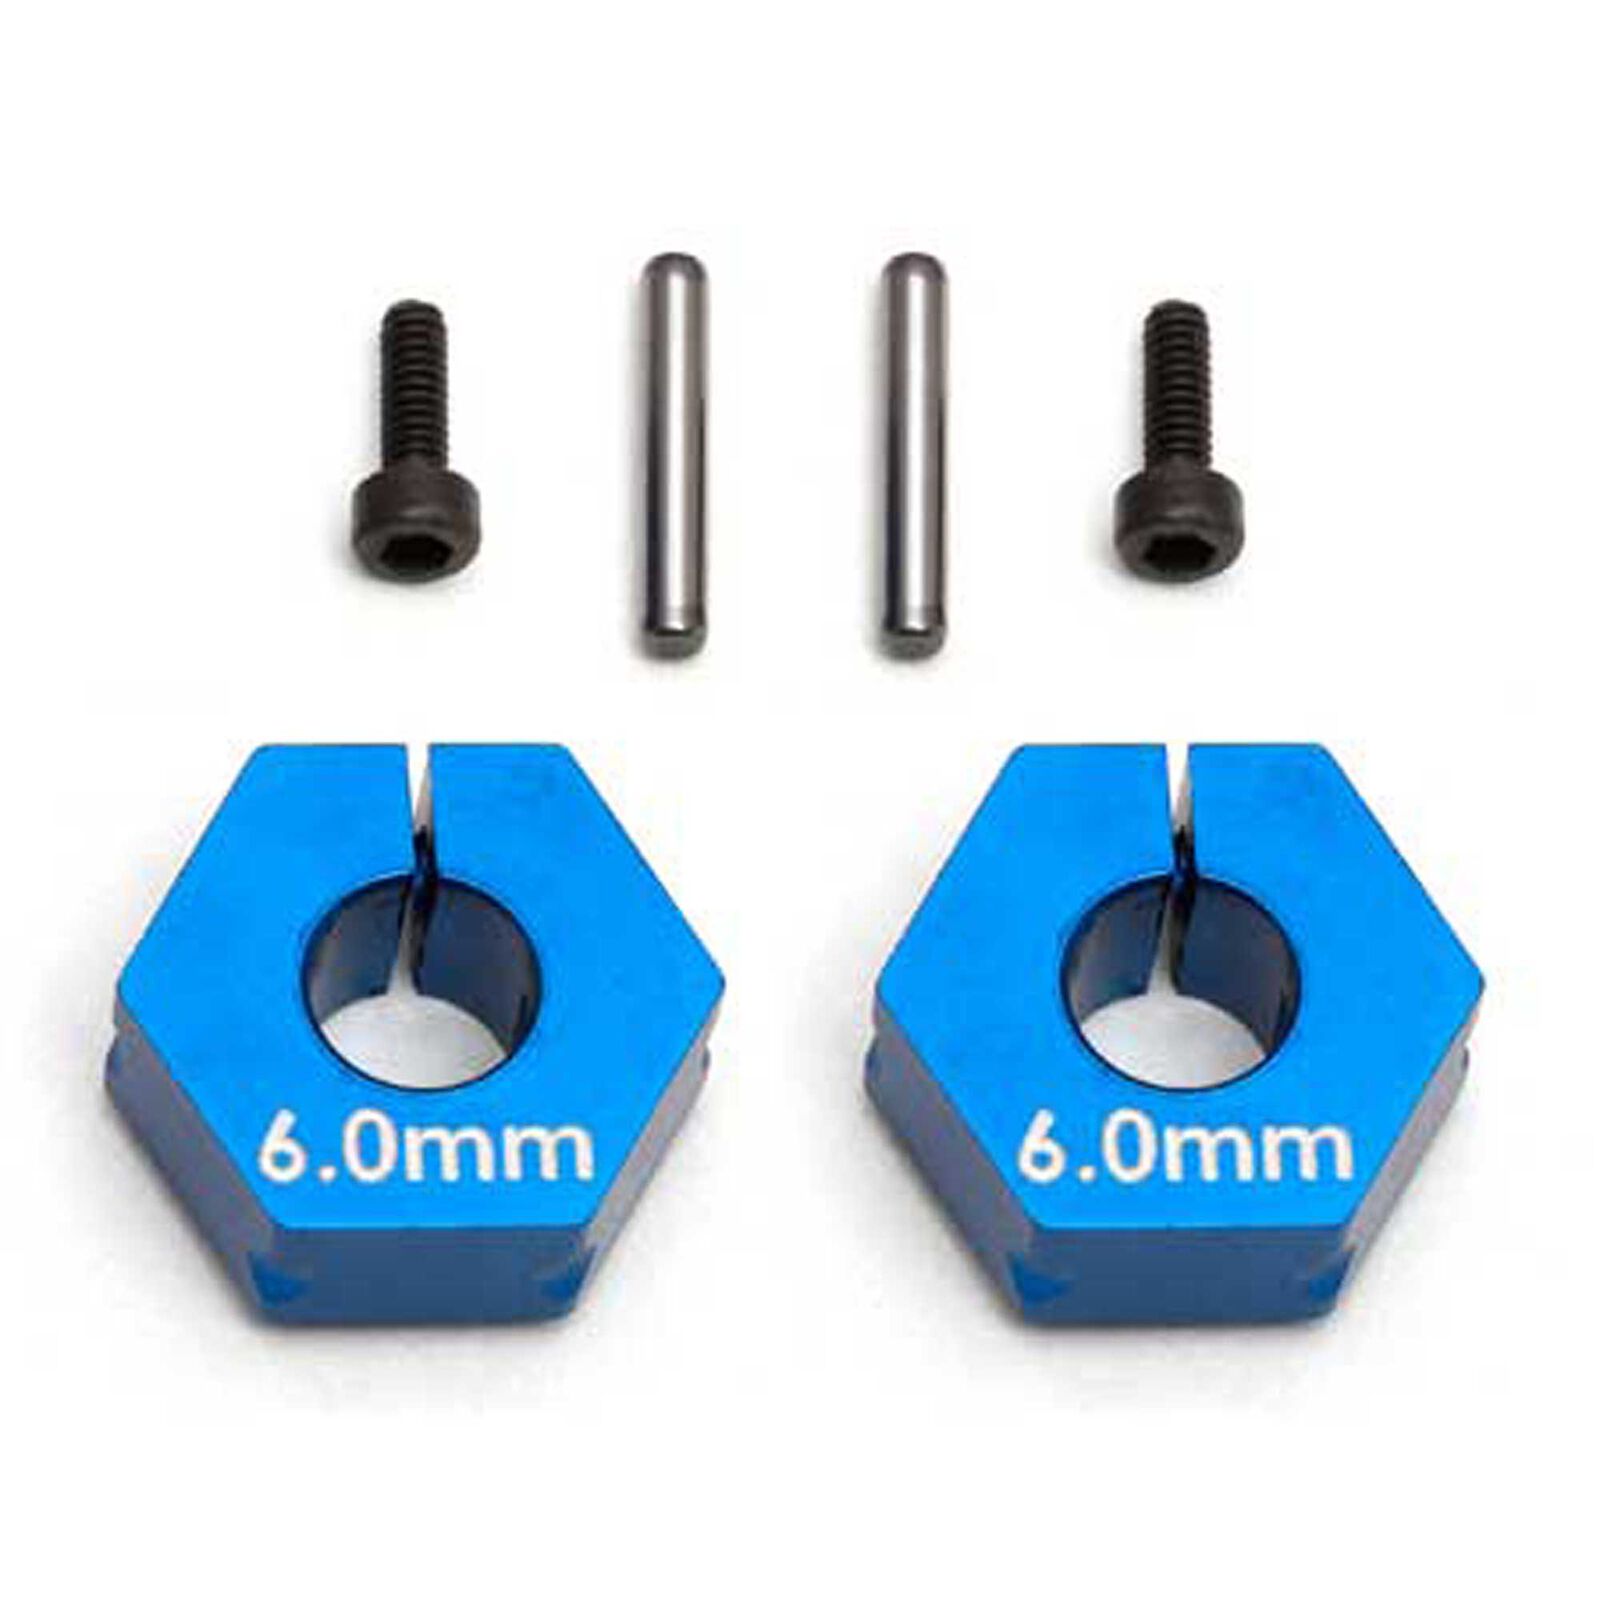 Factory Team Clamping Wheel Hexes 6.0mm